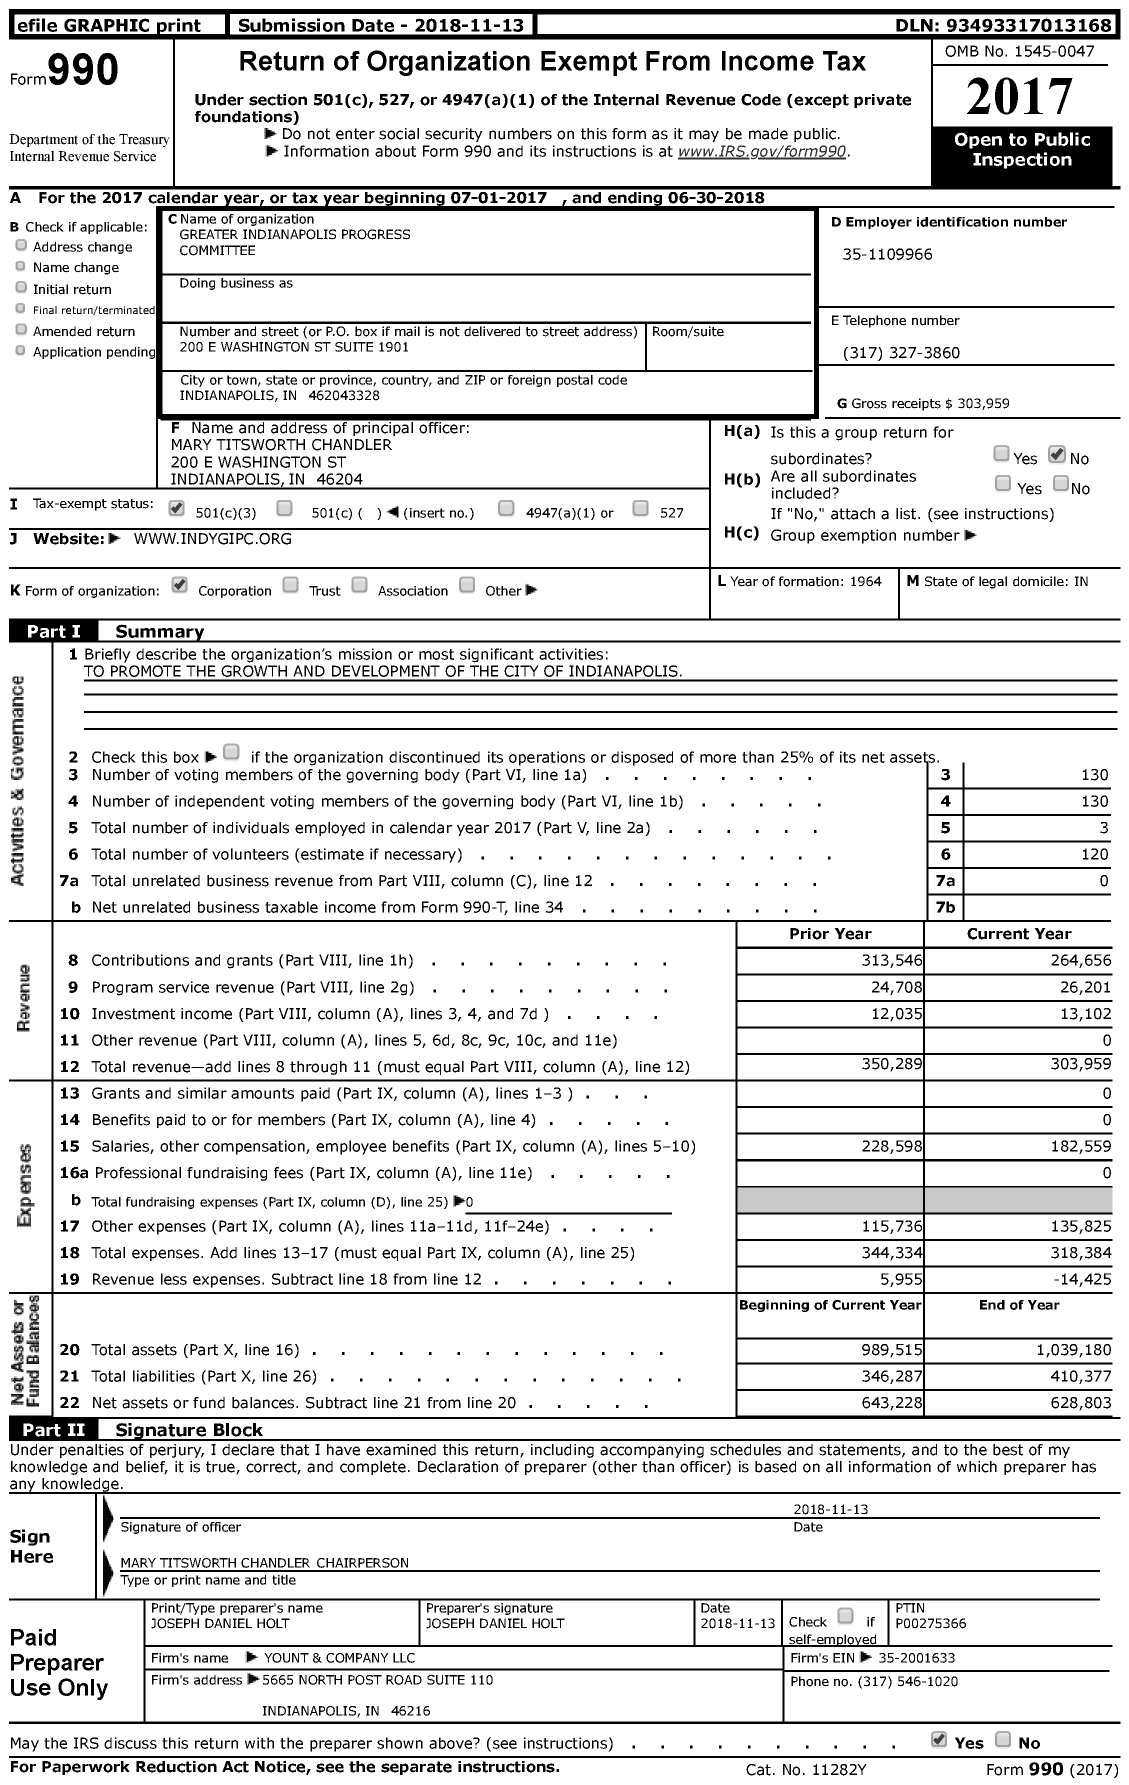 Image of first page of 2017 Form 990 for Greater Indianapolis Progress Committee